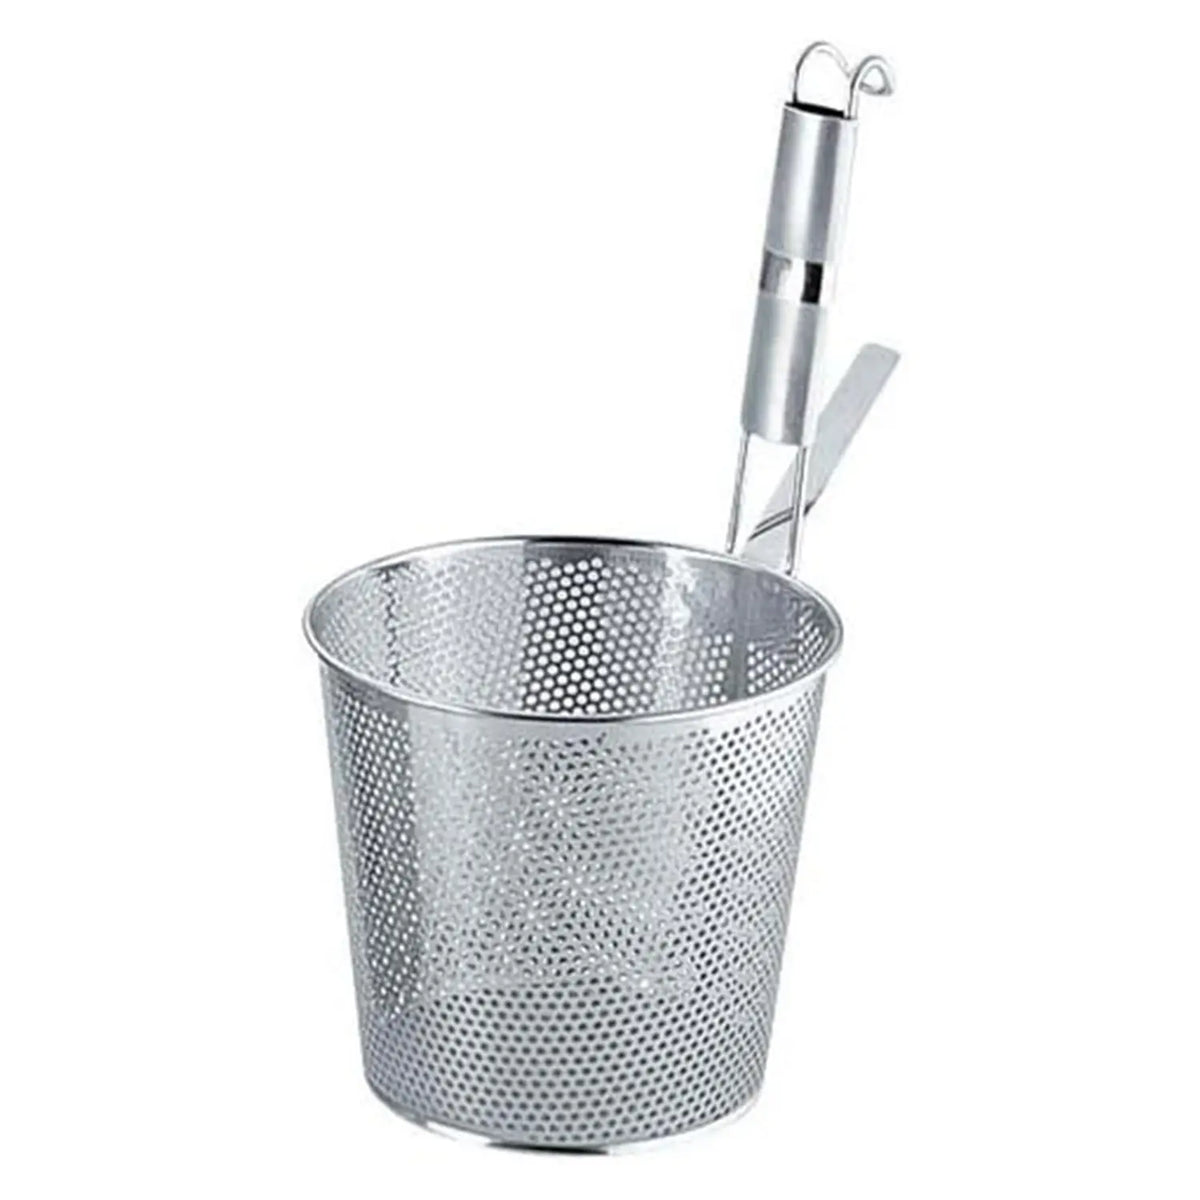 YUKIWA Stainless Steel Perforated Udon Tebo Noodle Strainer Flat Base with Metal Handle